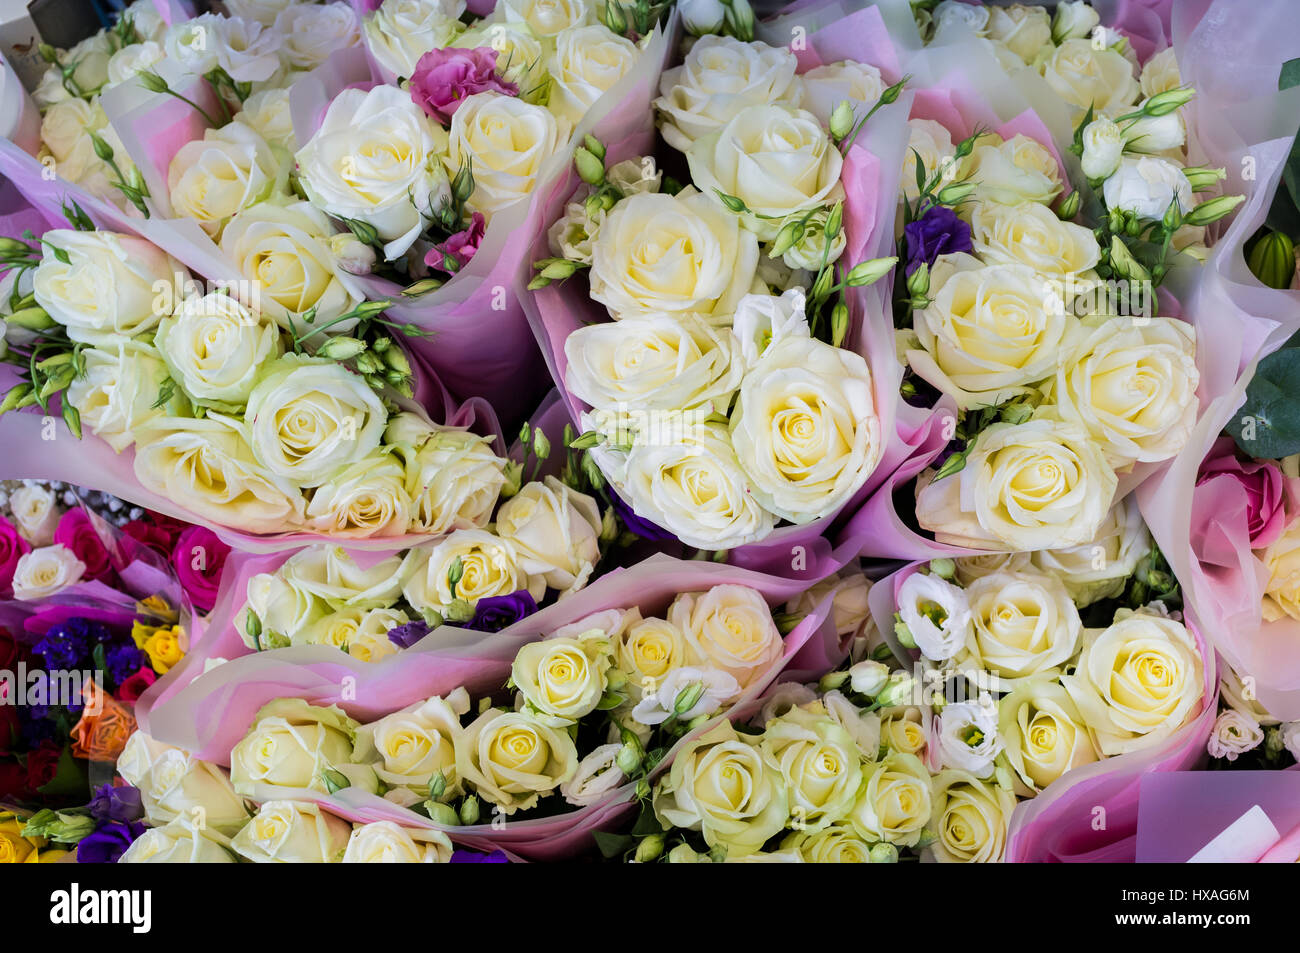 Bunches of different coloured roses for sale and on display at a florists. Stock Photo